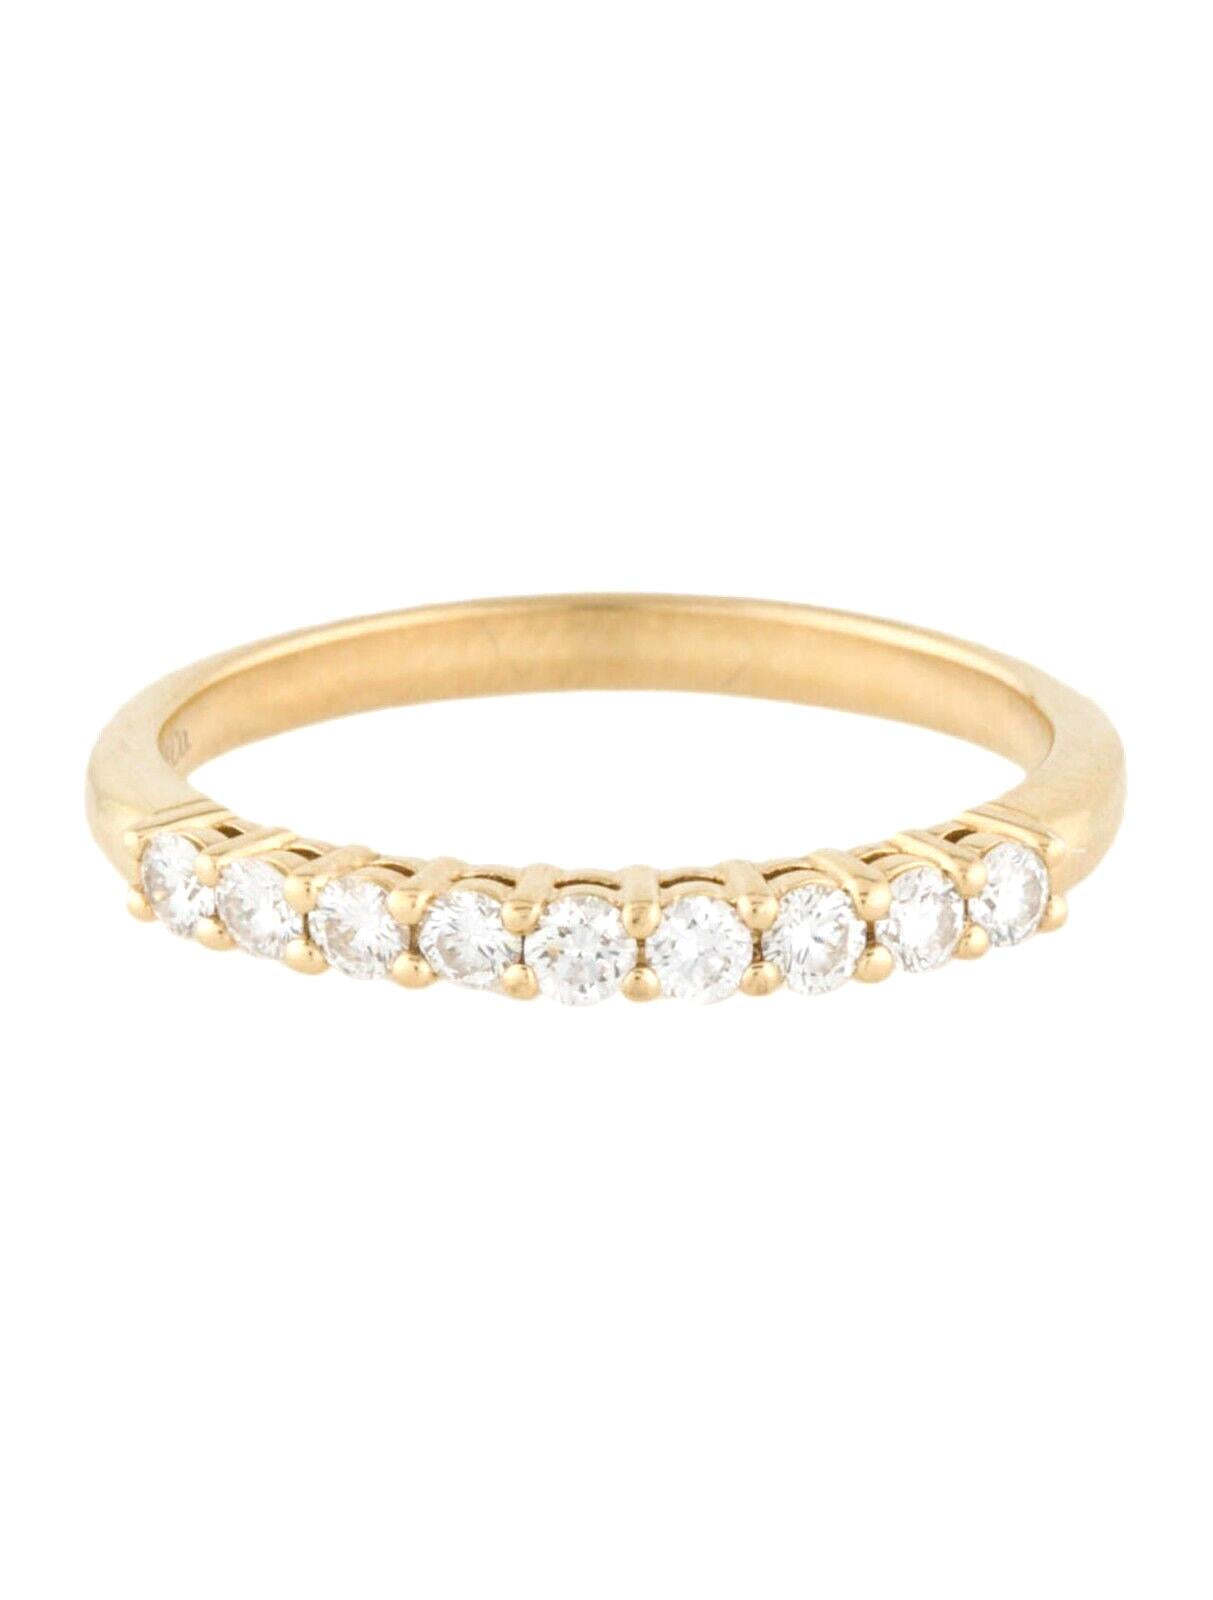 Primary image for Tiffany & Co. Yellow Gold Embrace .27ct Diamond 2.2mm Shared Wedding Band 7